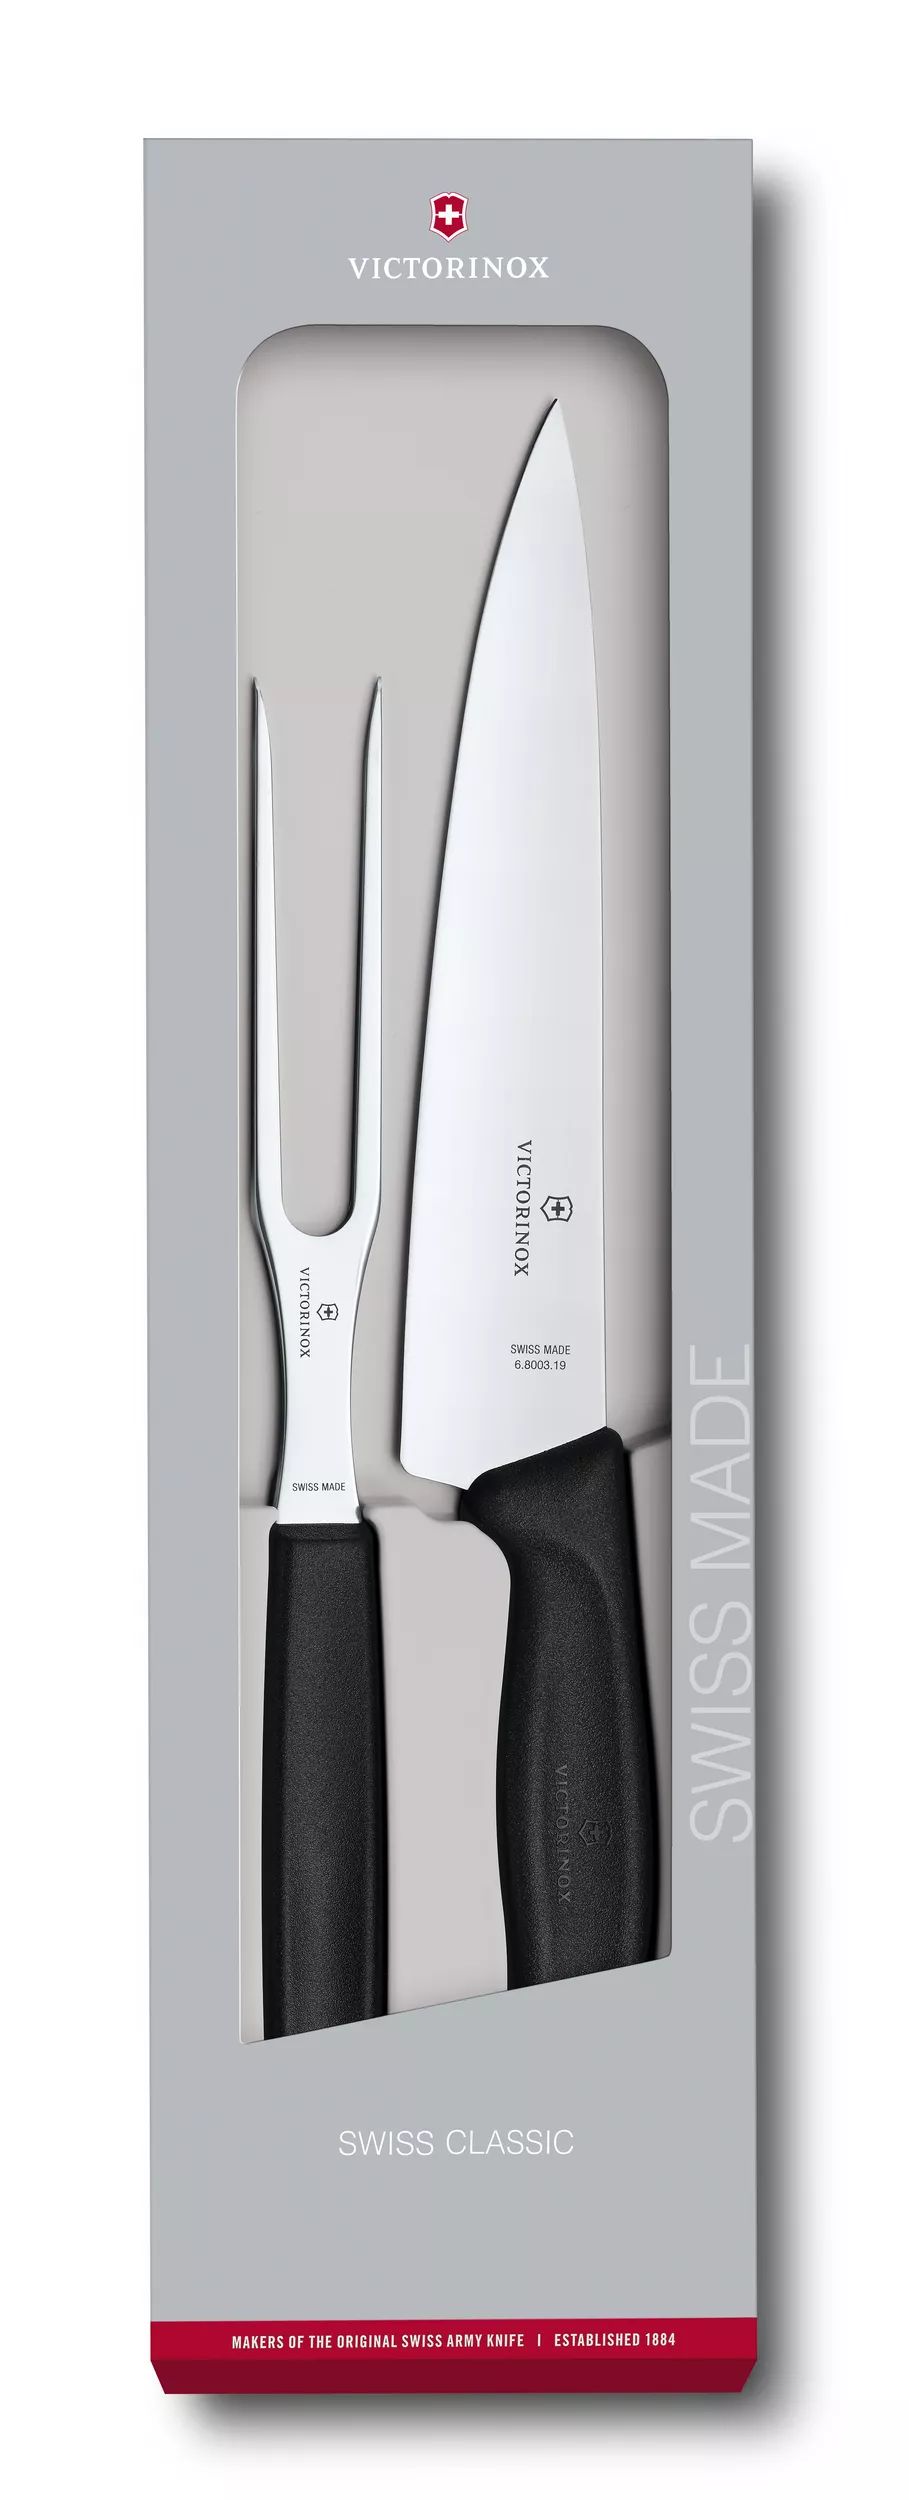 Swiss Classic Carving Set, 2 pieces-6.7133.2G